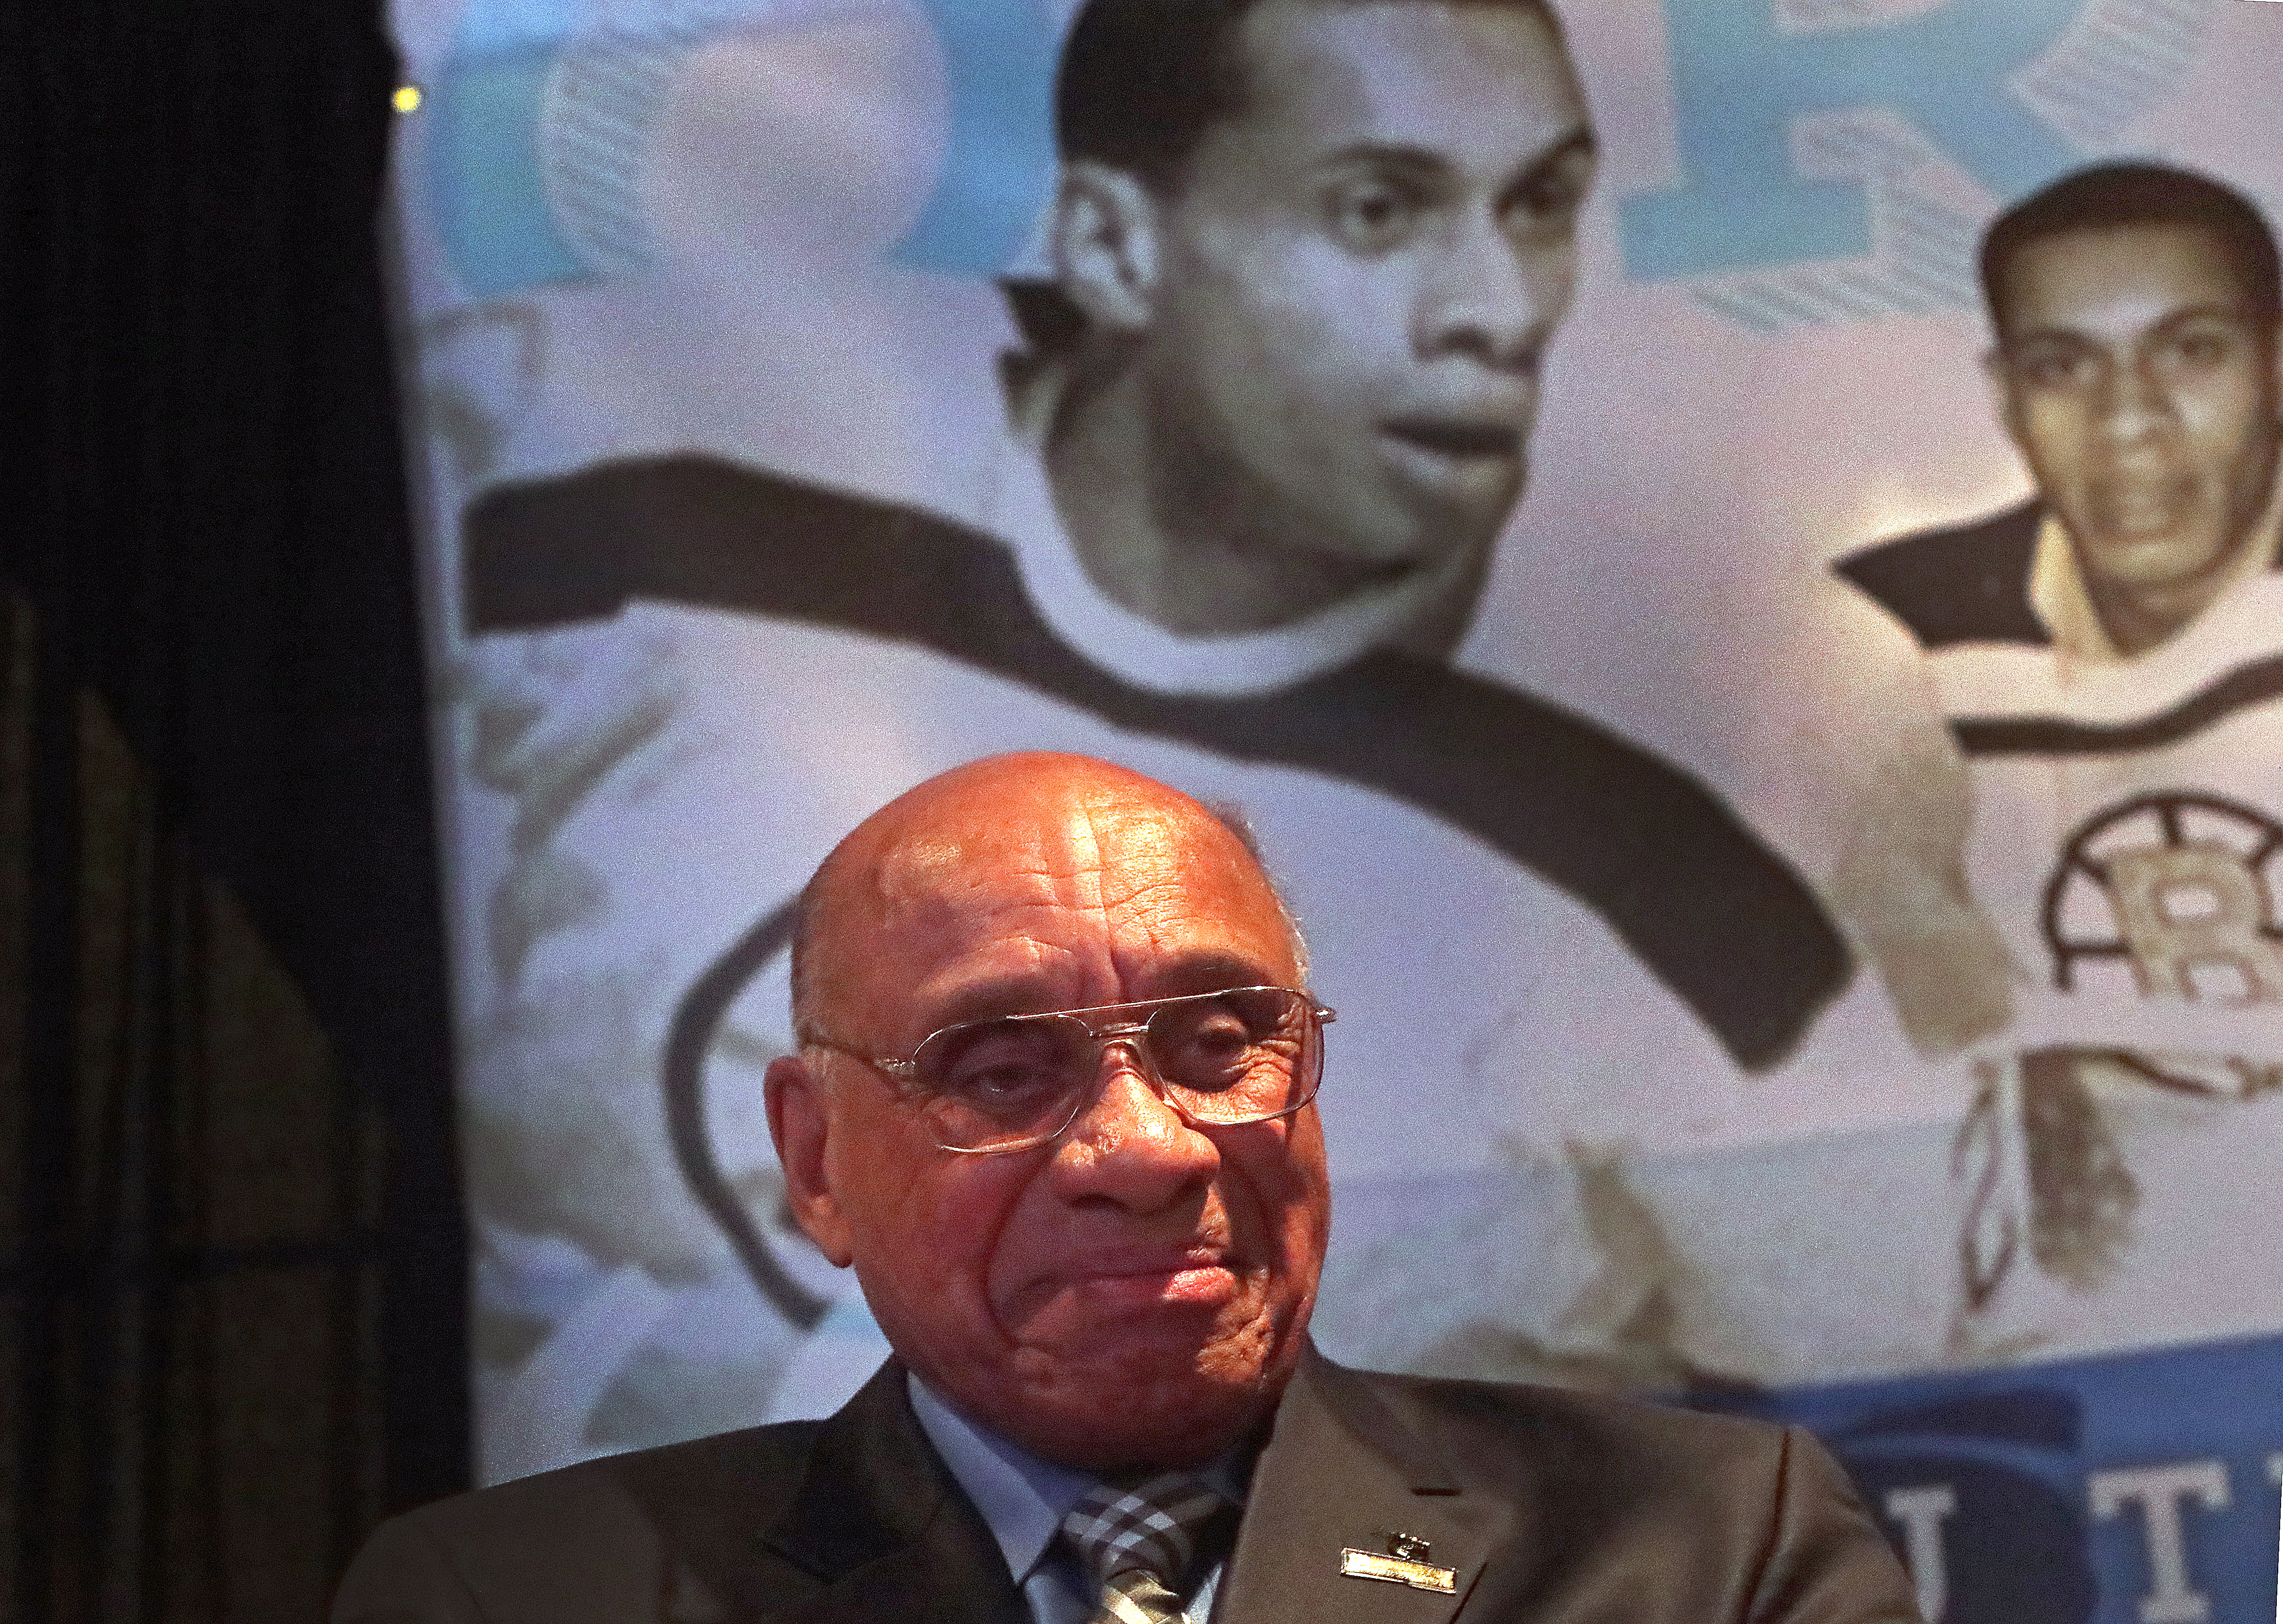 League moves Willie O'Ree's number retirement ceremony to 2022